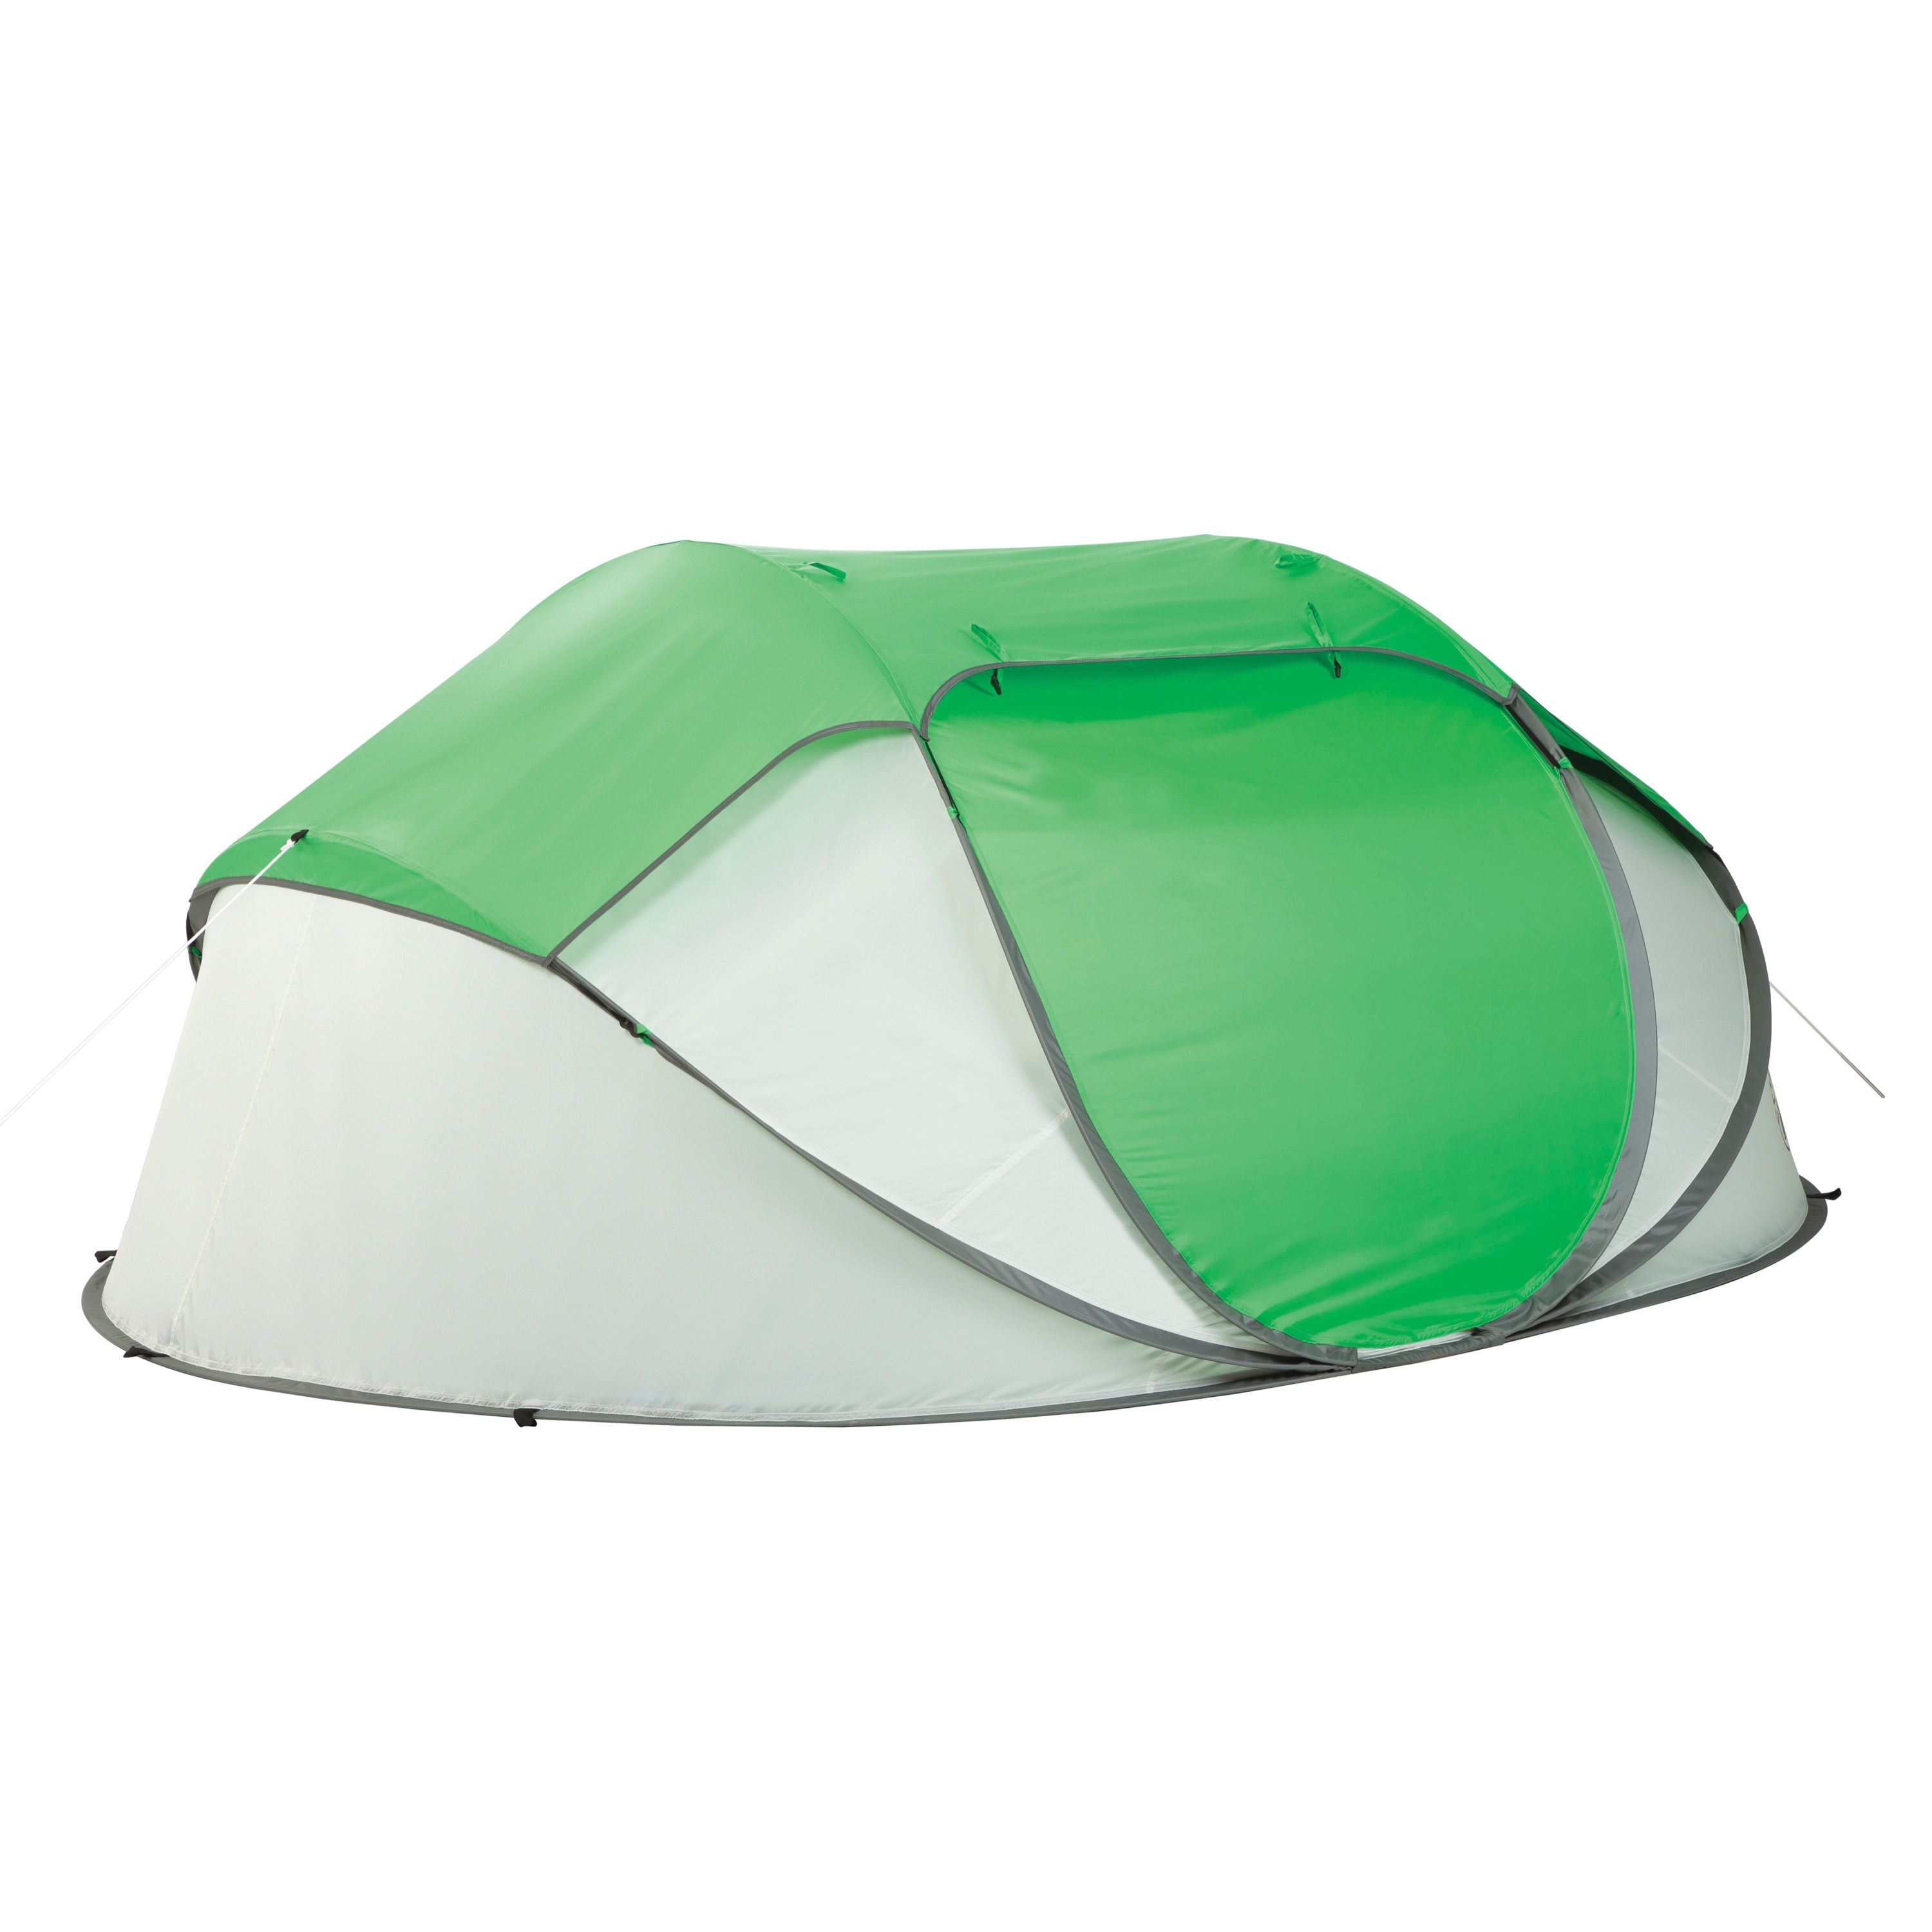 Coleman 4-Person Instant Pop-Up Tent 1 Room, Green - image 4 of 6